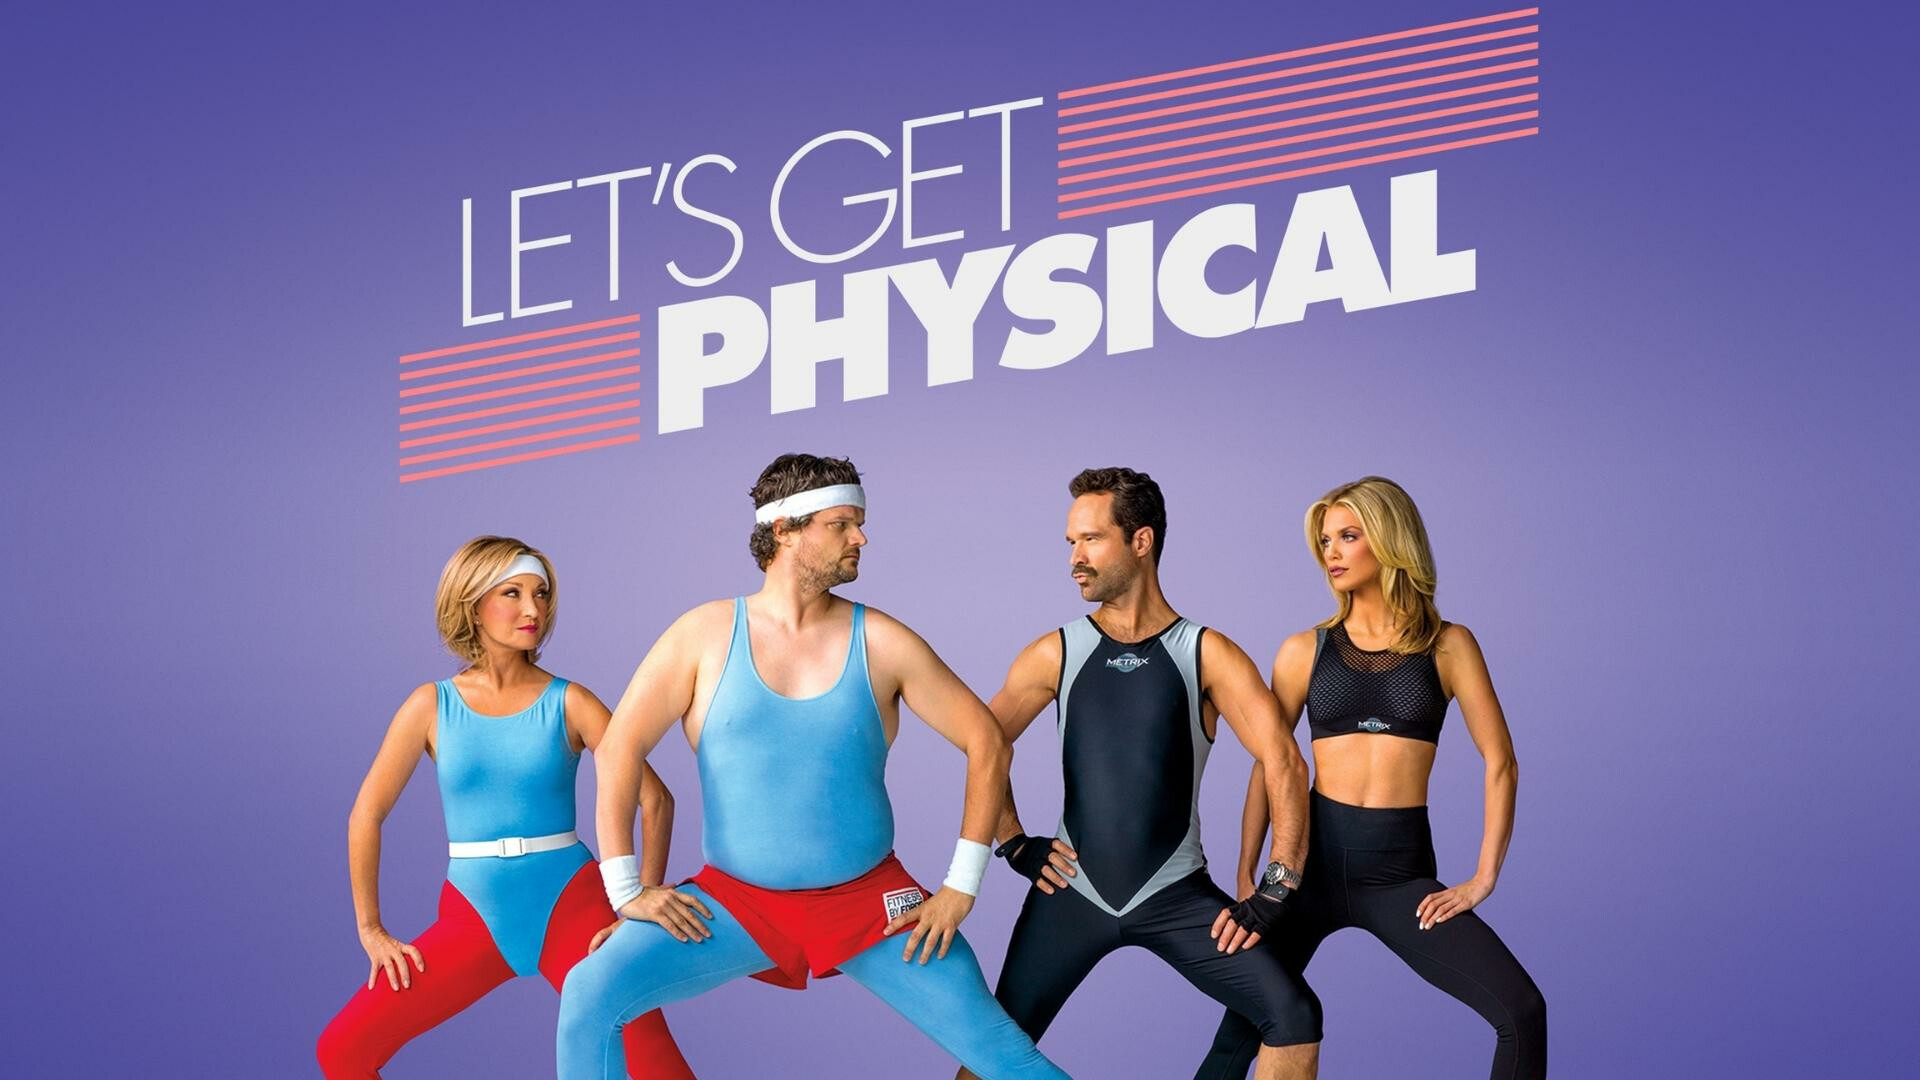 Let's Get Physical, Children's Message